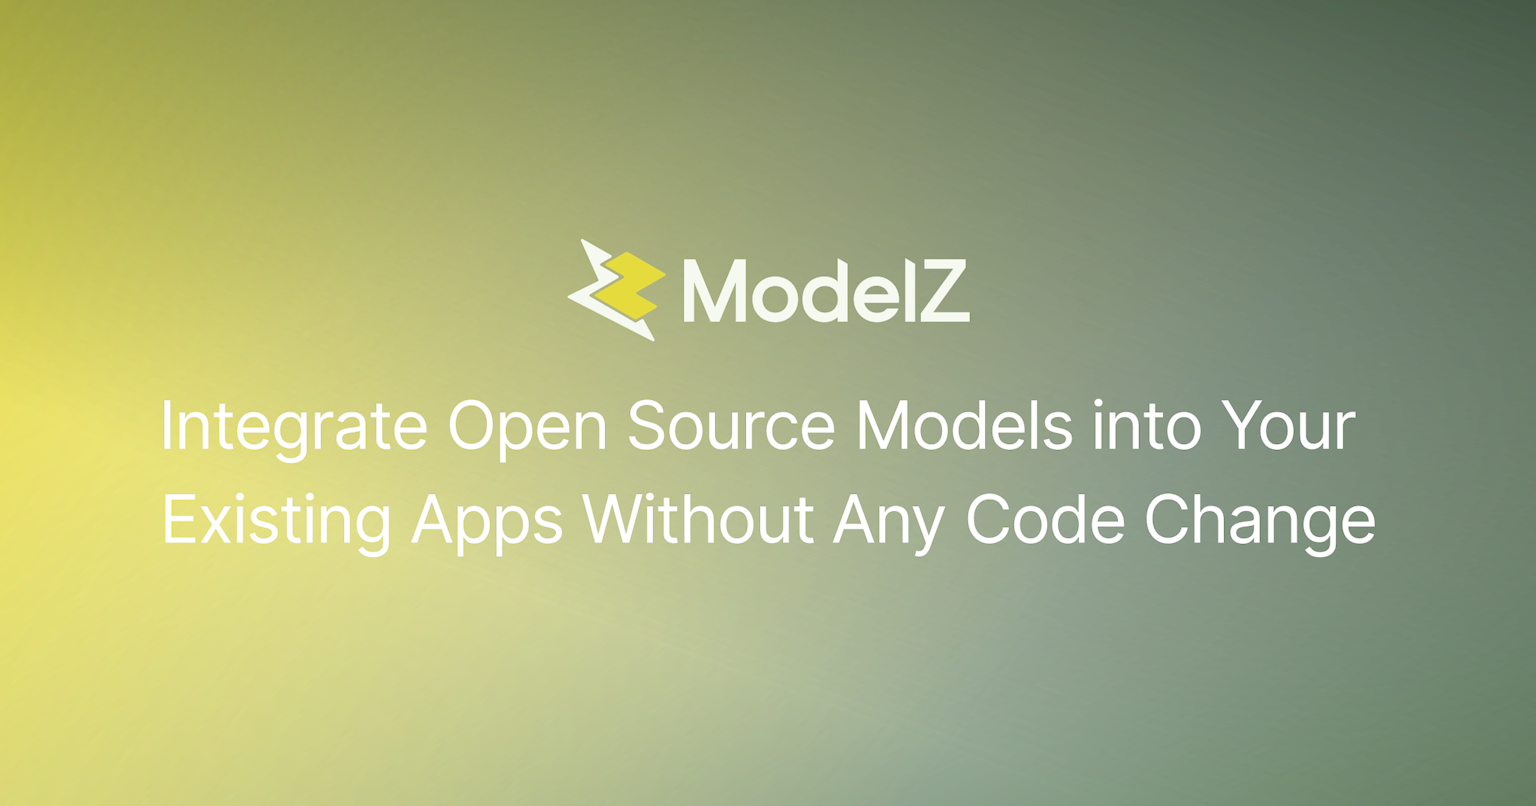 Integrate Open Source Models into Your Existing Apps Without Any Code Change